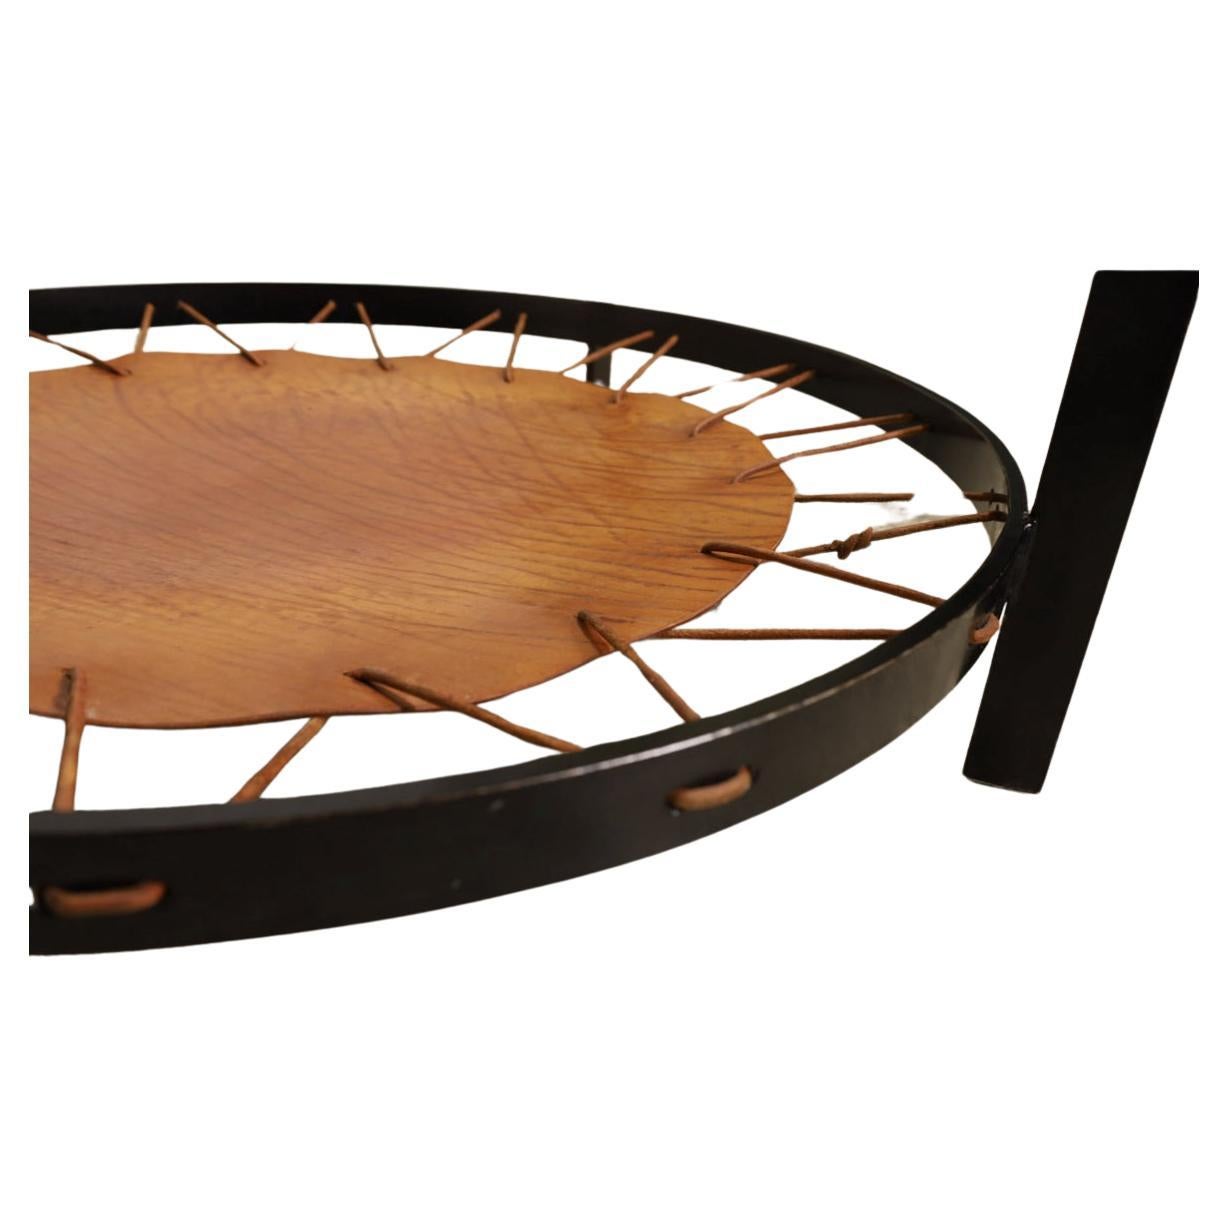 Mid century modern Round glass Safari sling leather coffee table on black lacquered metal base. Lower circular Magazine or Newspaper shelf in brown leather held up by rope. Table shows normal Use wear minor scratches on Round glass top. The leather